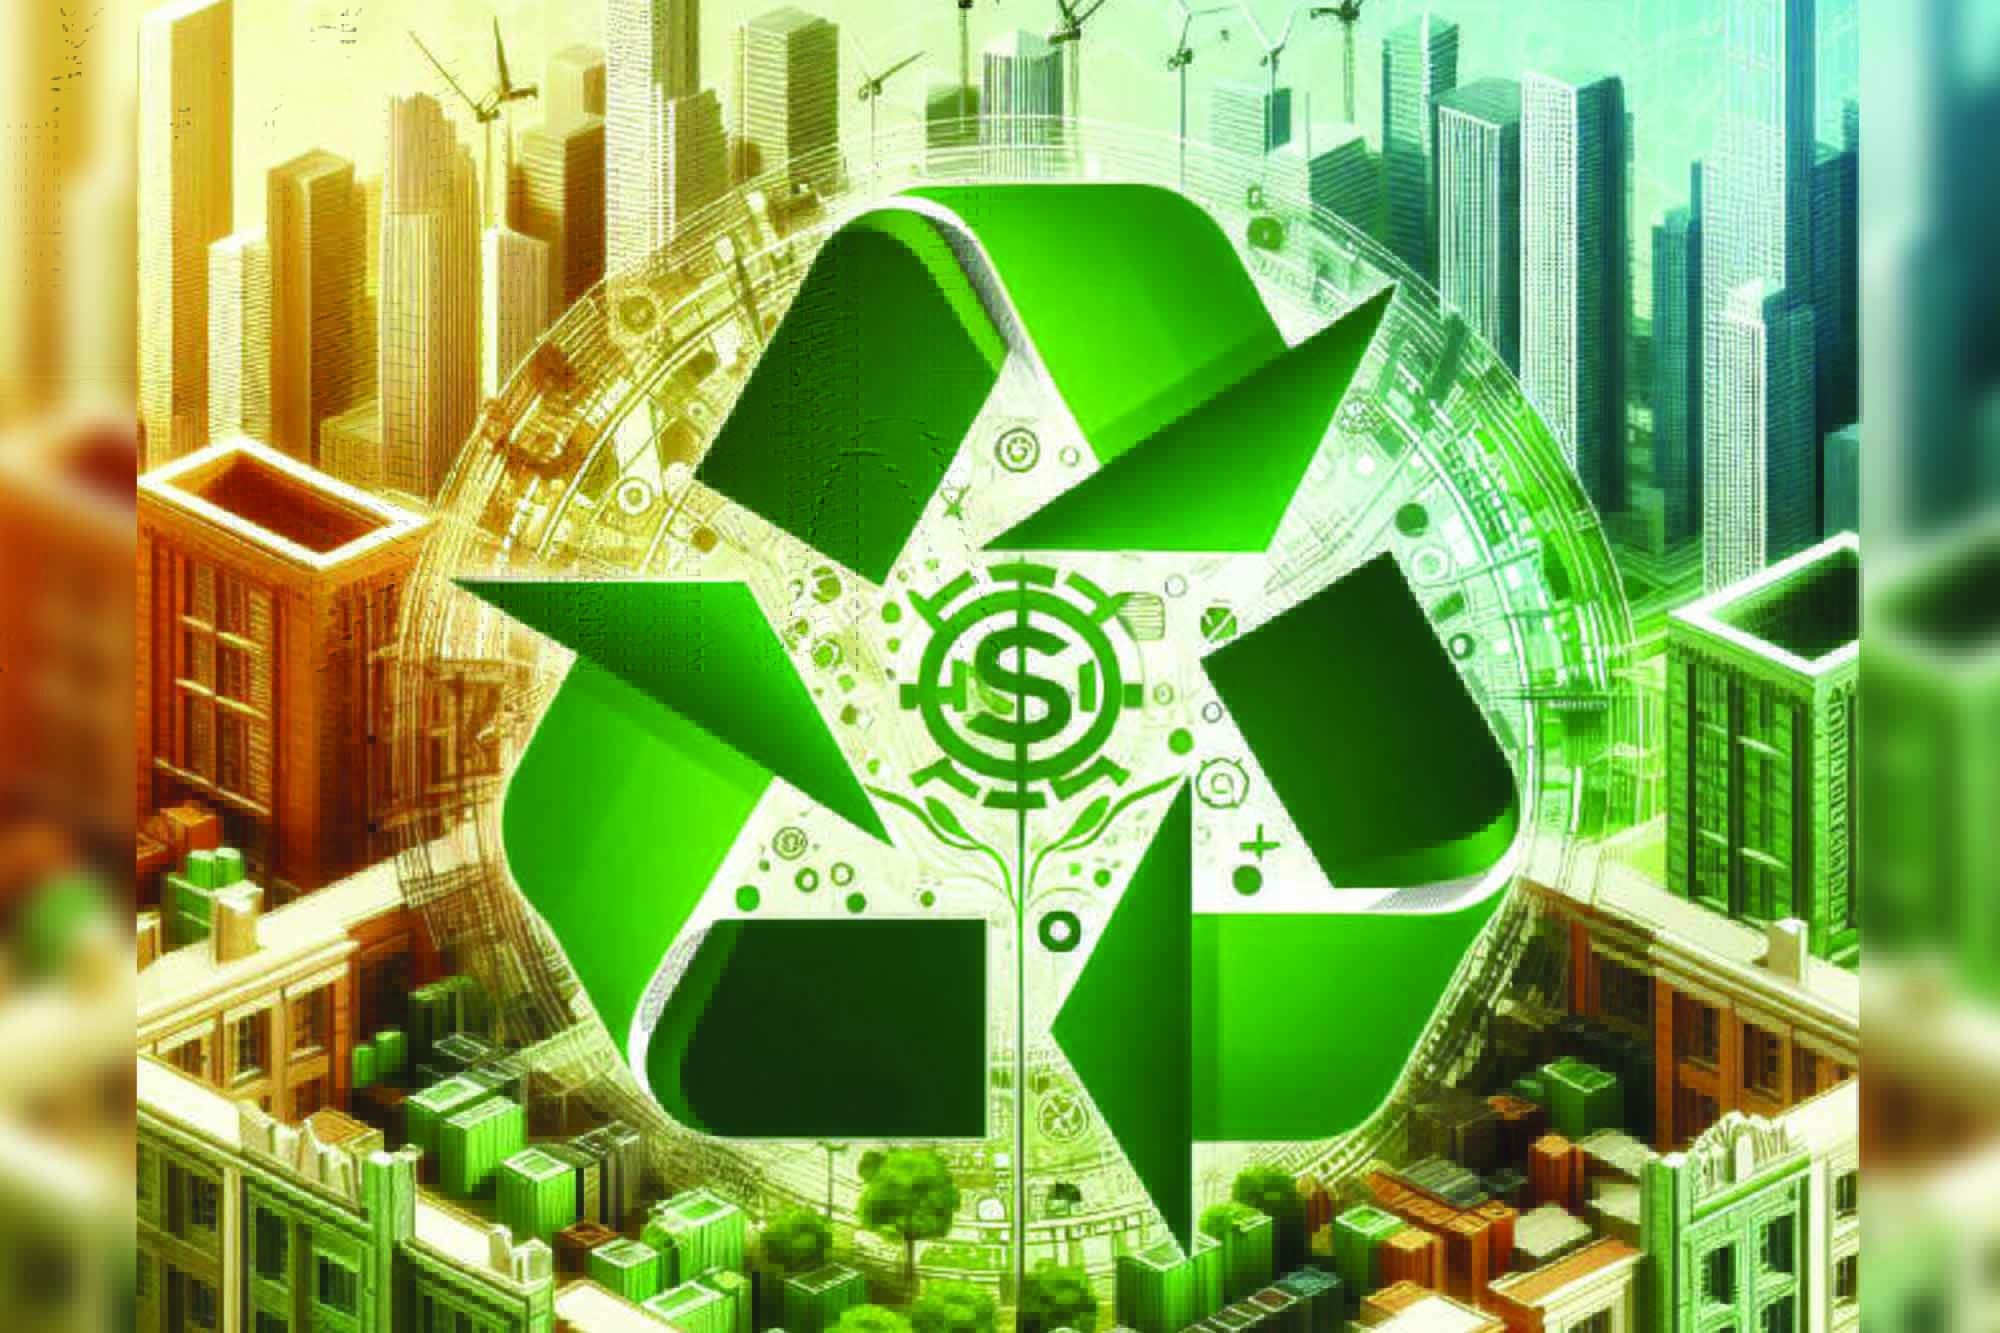 The Green Building Materials market represents a transformative segment within the construction industry, characterised by the adoption of sustainable and eco-friendly materials and practices aimed at reducing environmental impact, enhancing energy efficiency, and promoting occupant health and well-being.